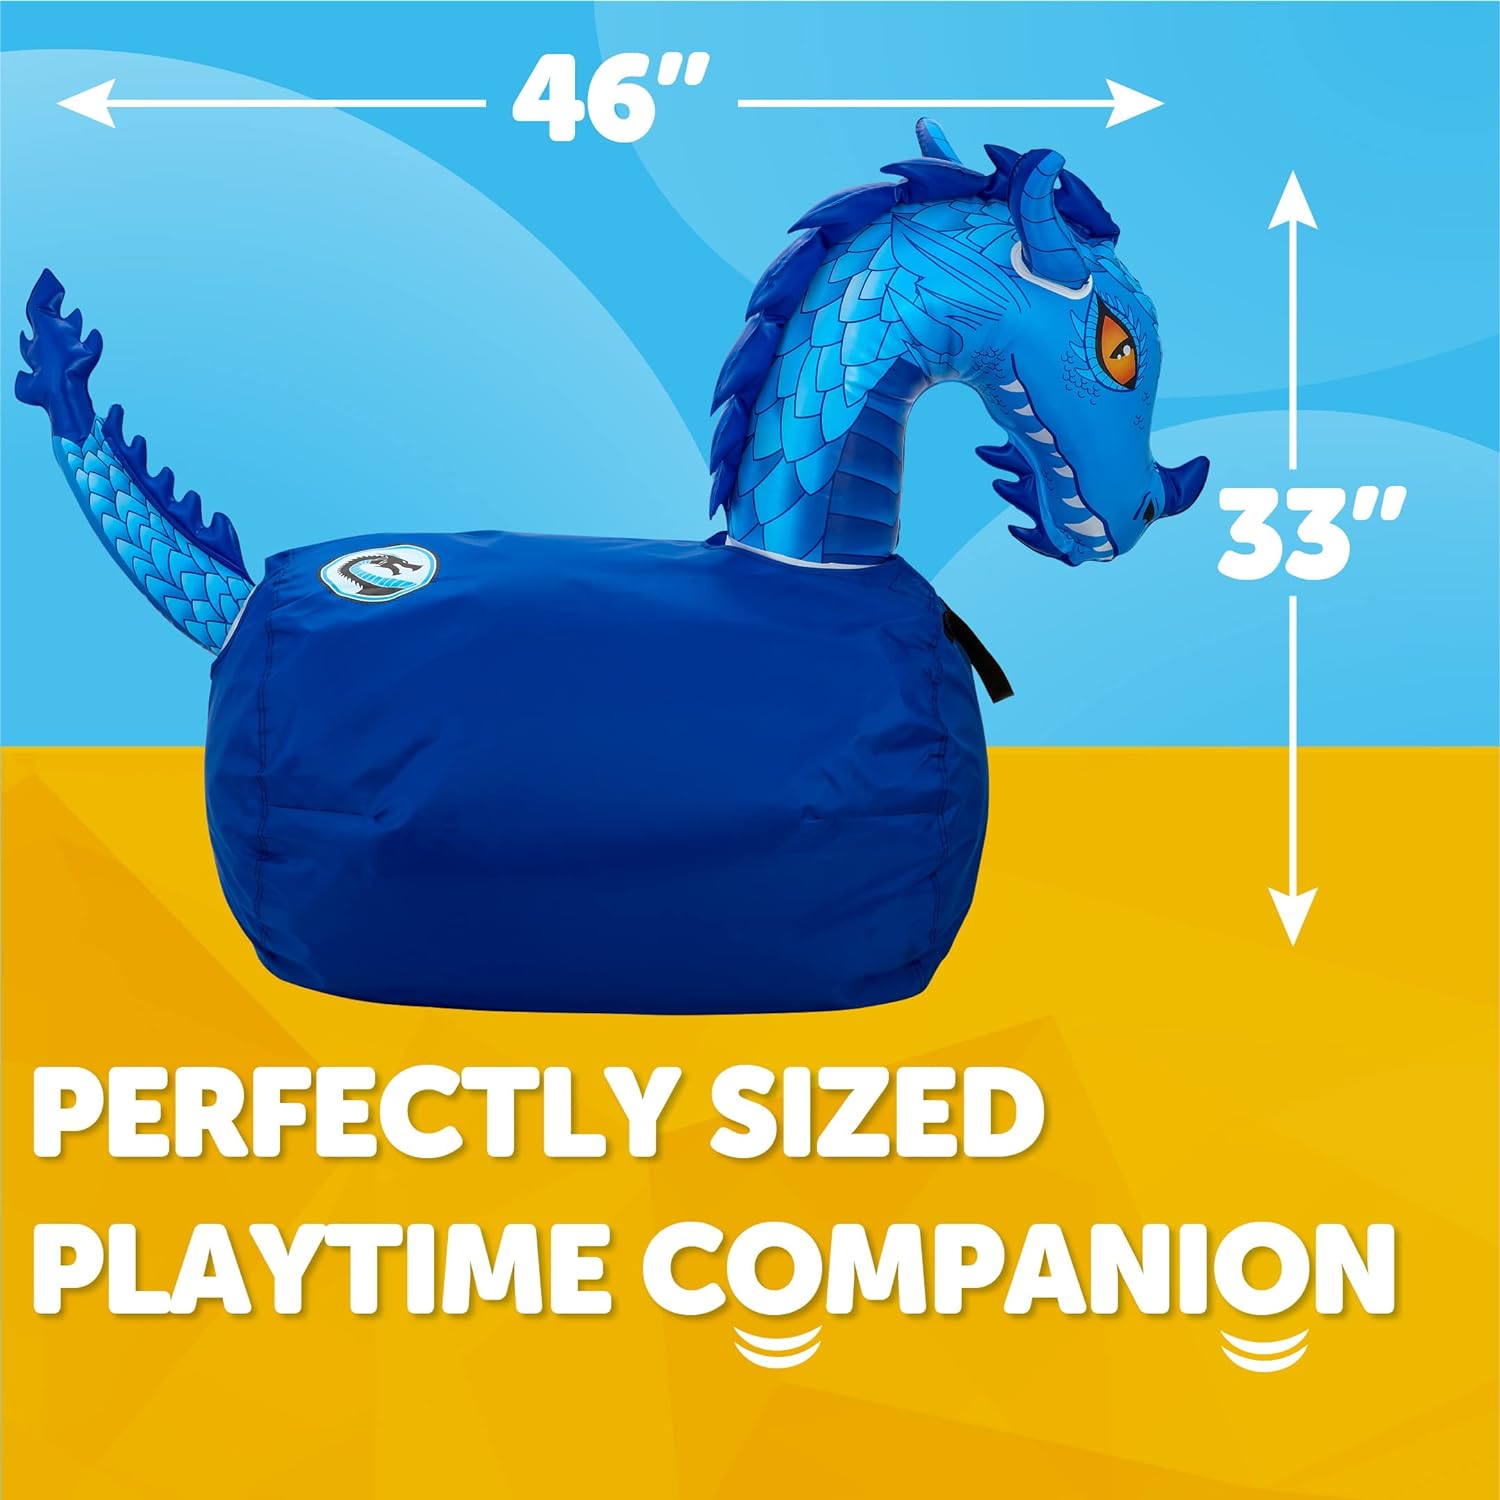 WADDLE Hip Hoppers Large Bouncy Hopper Inflatable Hopping Animal Bouncer, Supports Up to 250 Pounds, Ages 5 and Up (Blue Dragon)